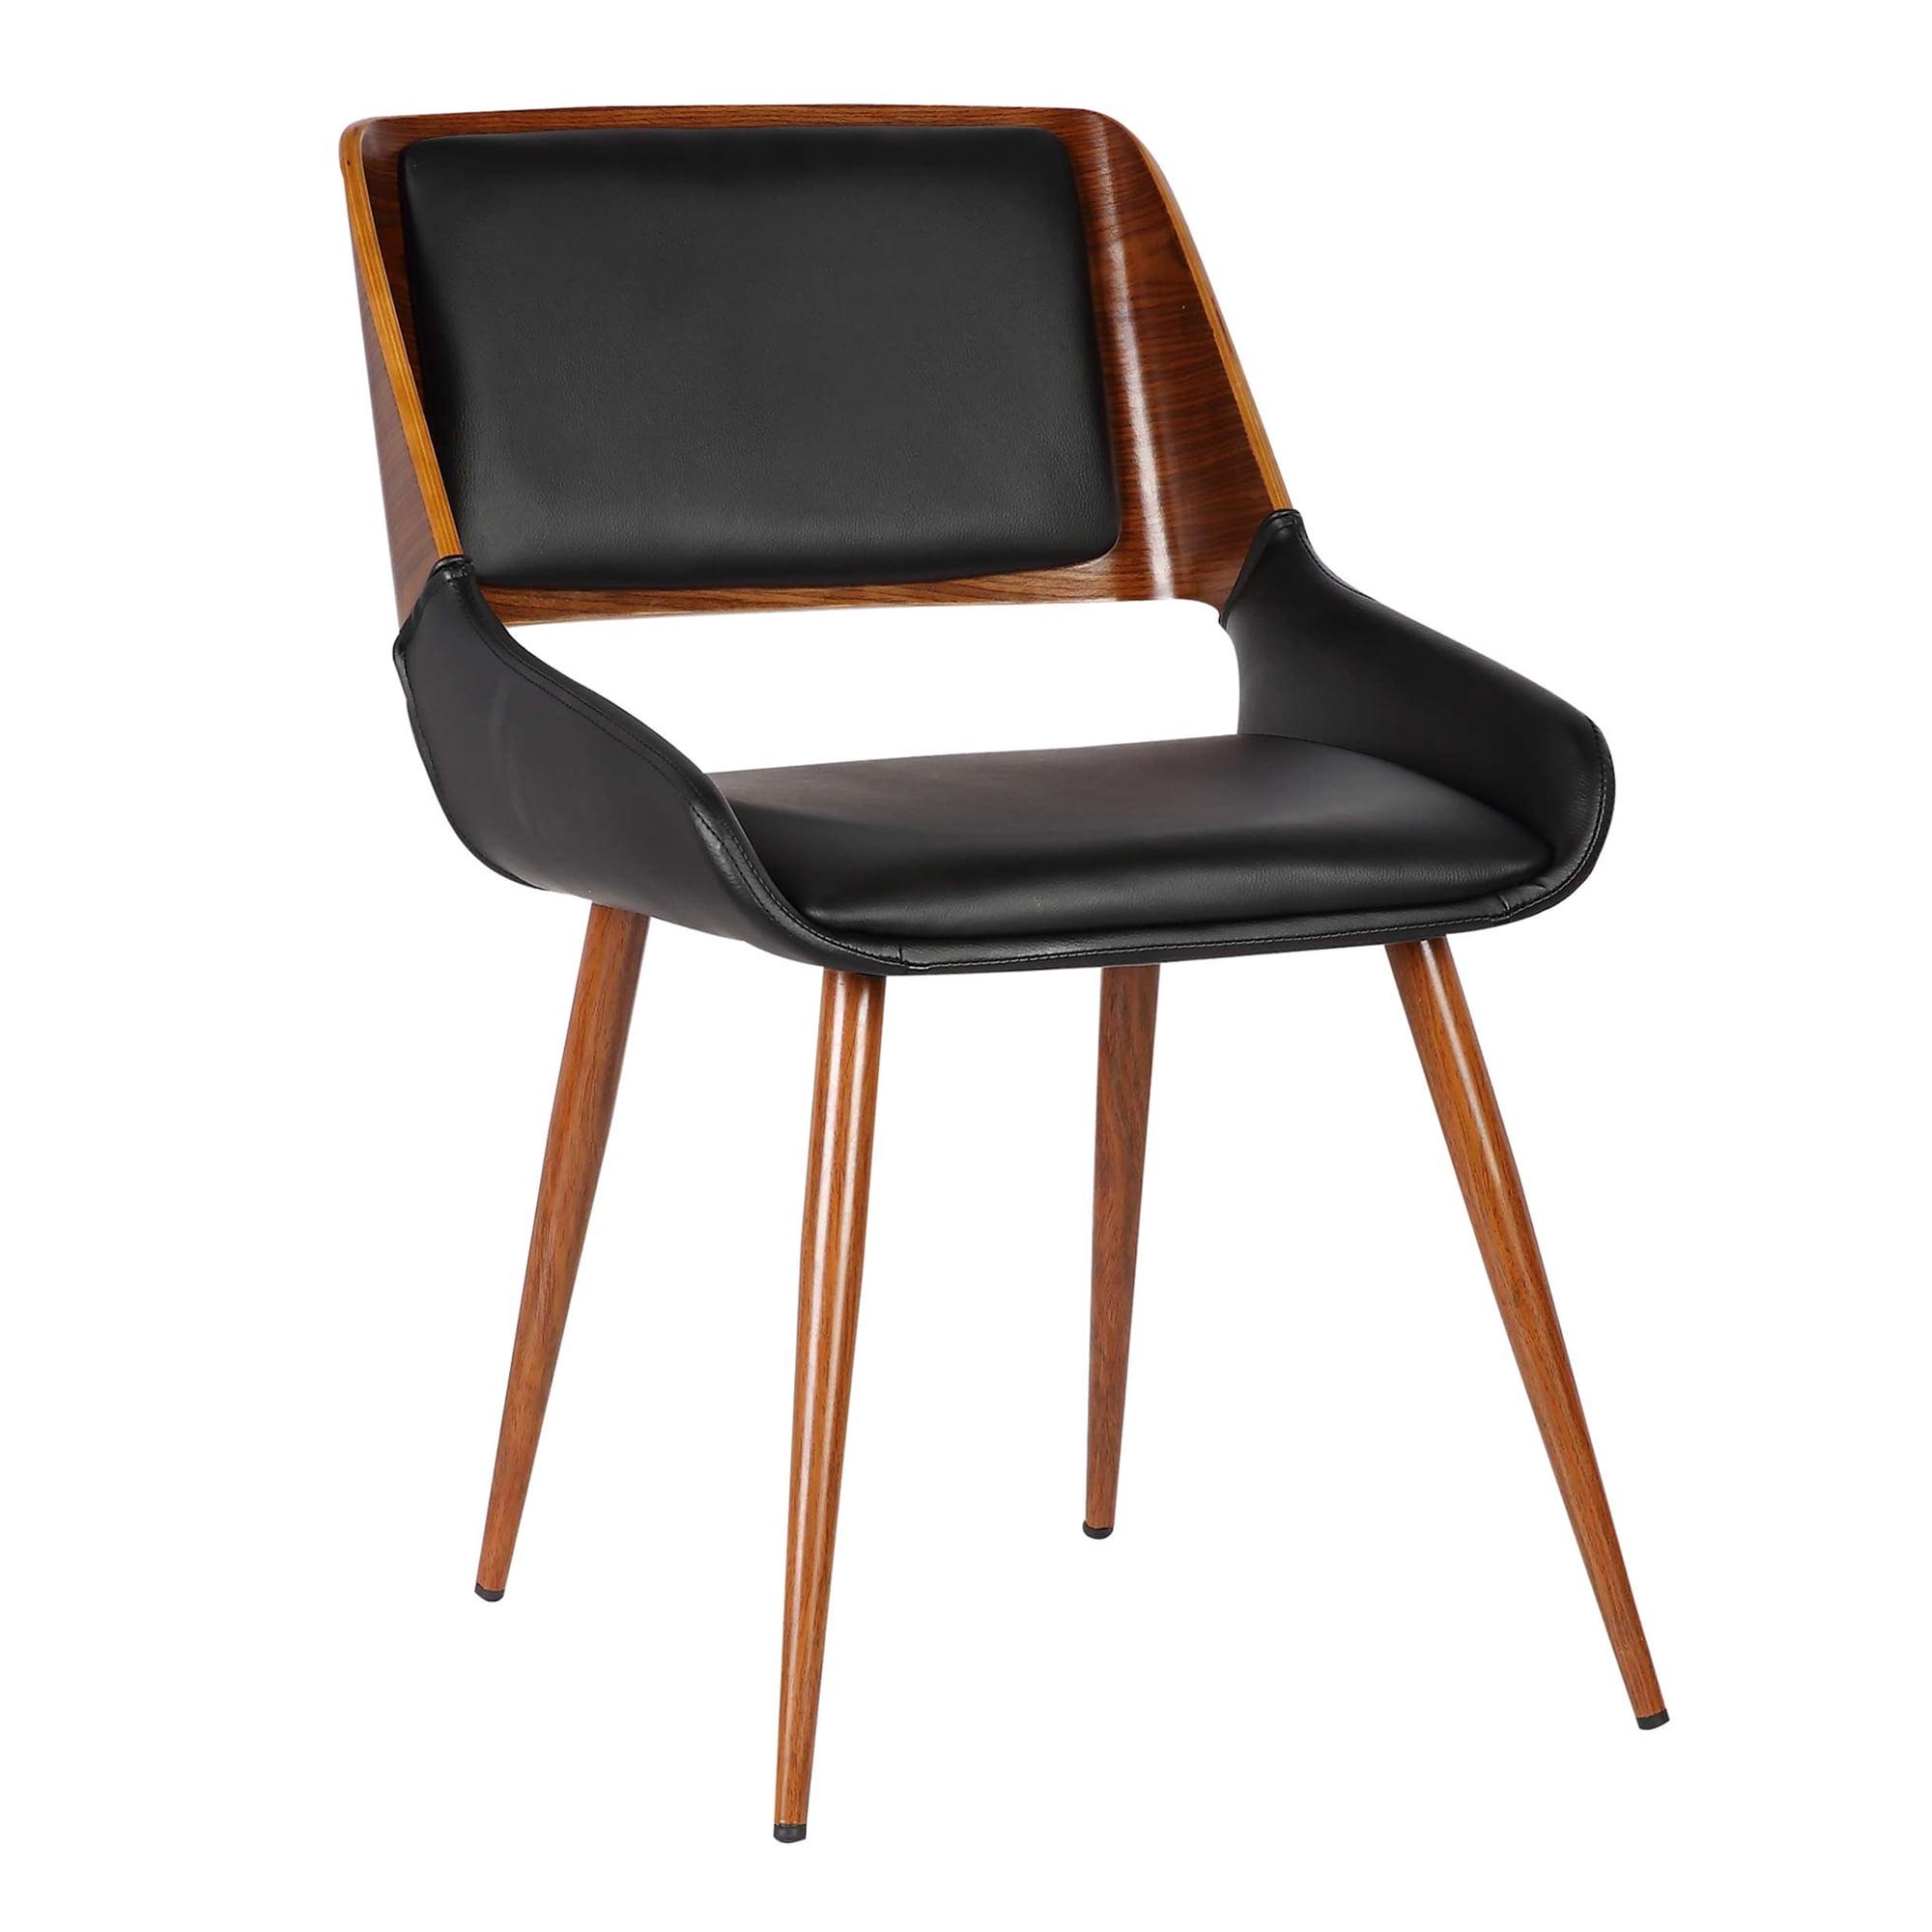 Mid-Century Modern Black Faux Leather Upholstered Side Chair with Walnut Wood Frame